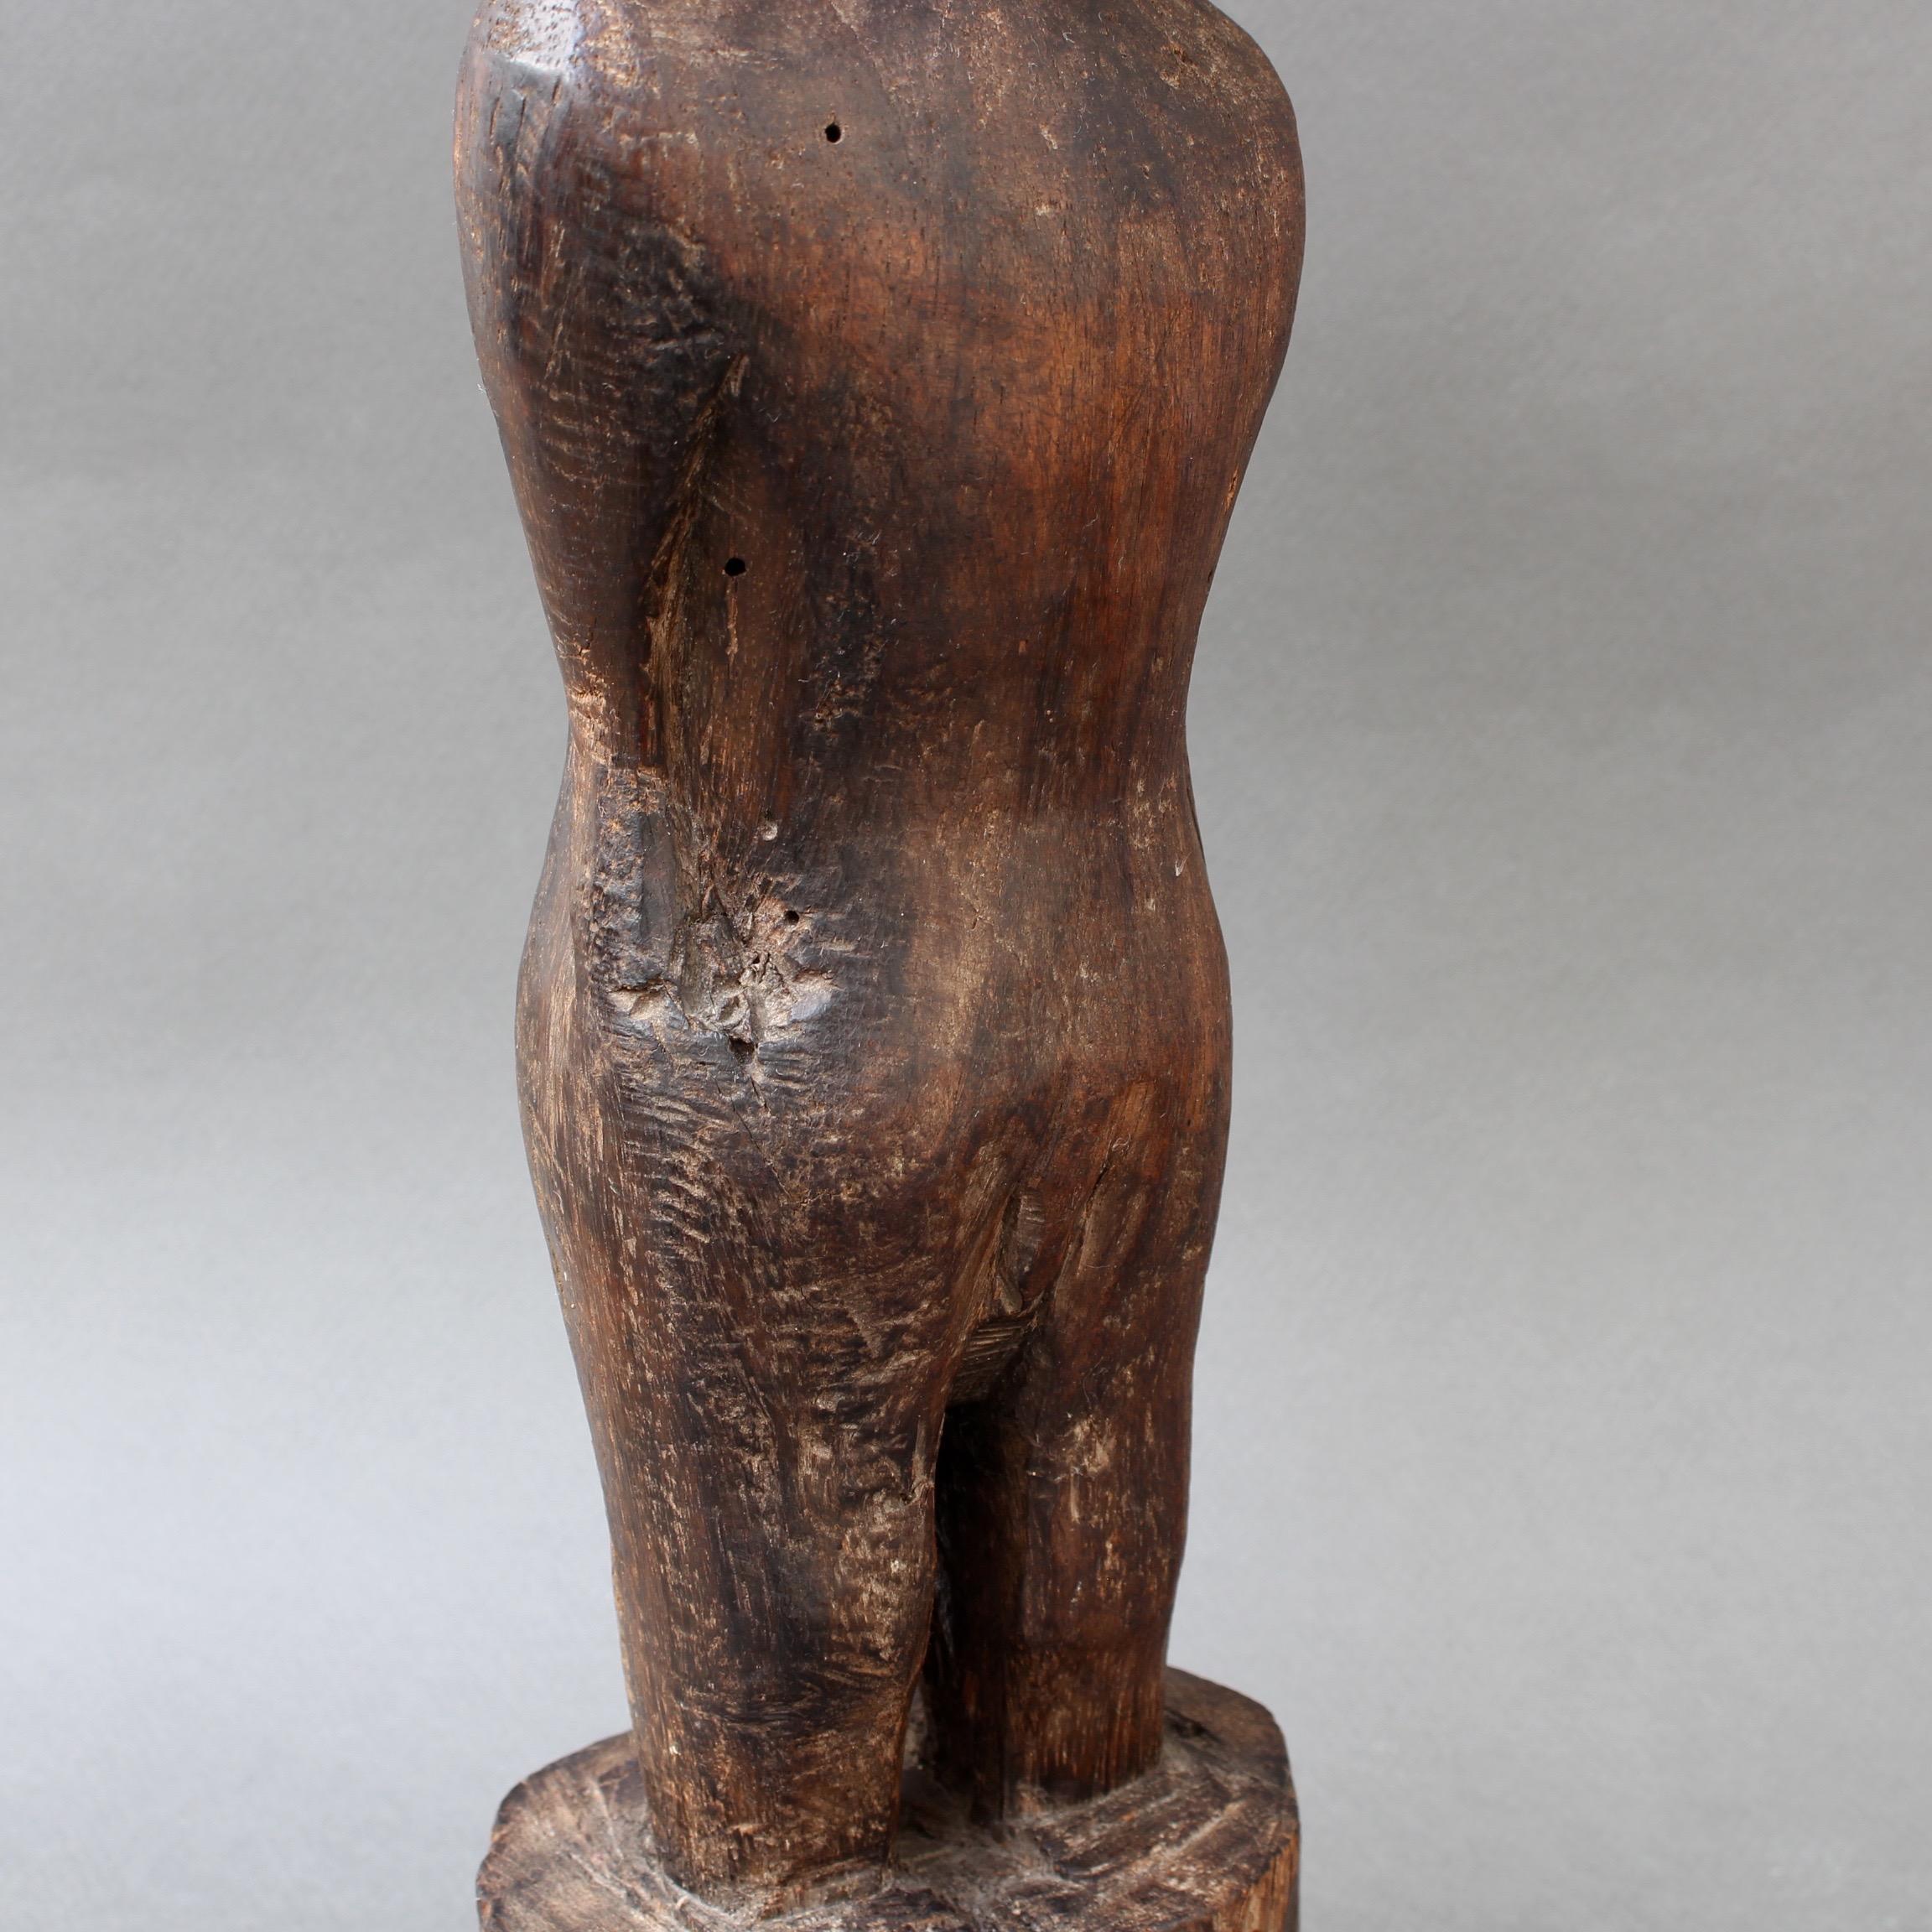 Wooden Carving or Sculpture of Standing Ancestral Figure from Timor, Indonesia 6